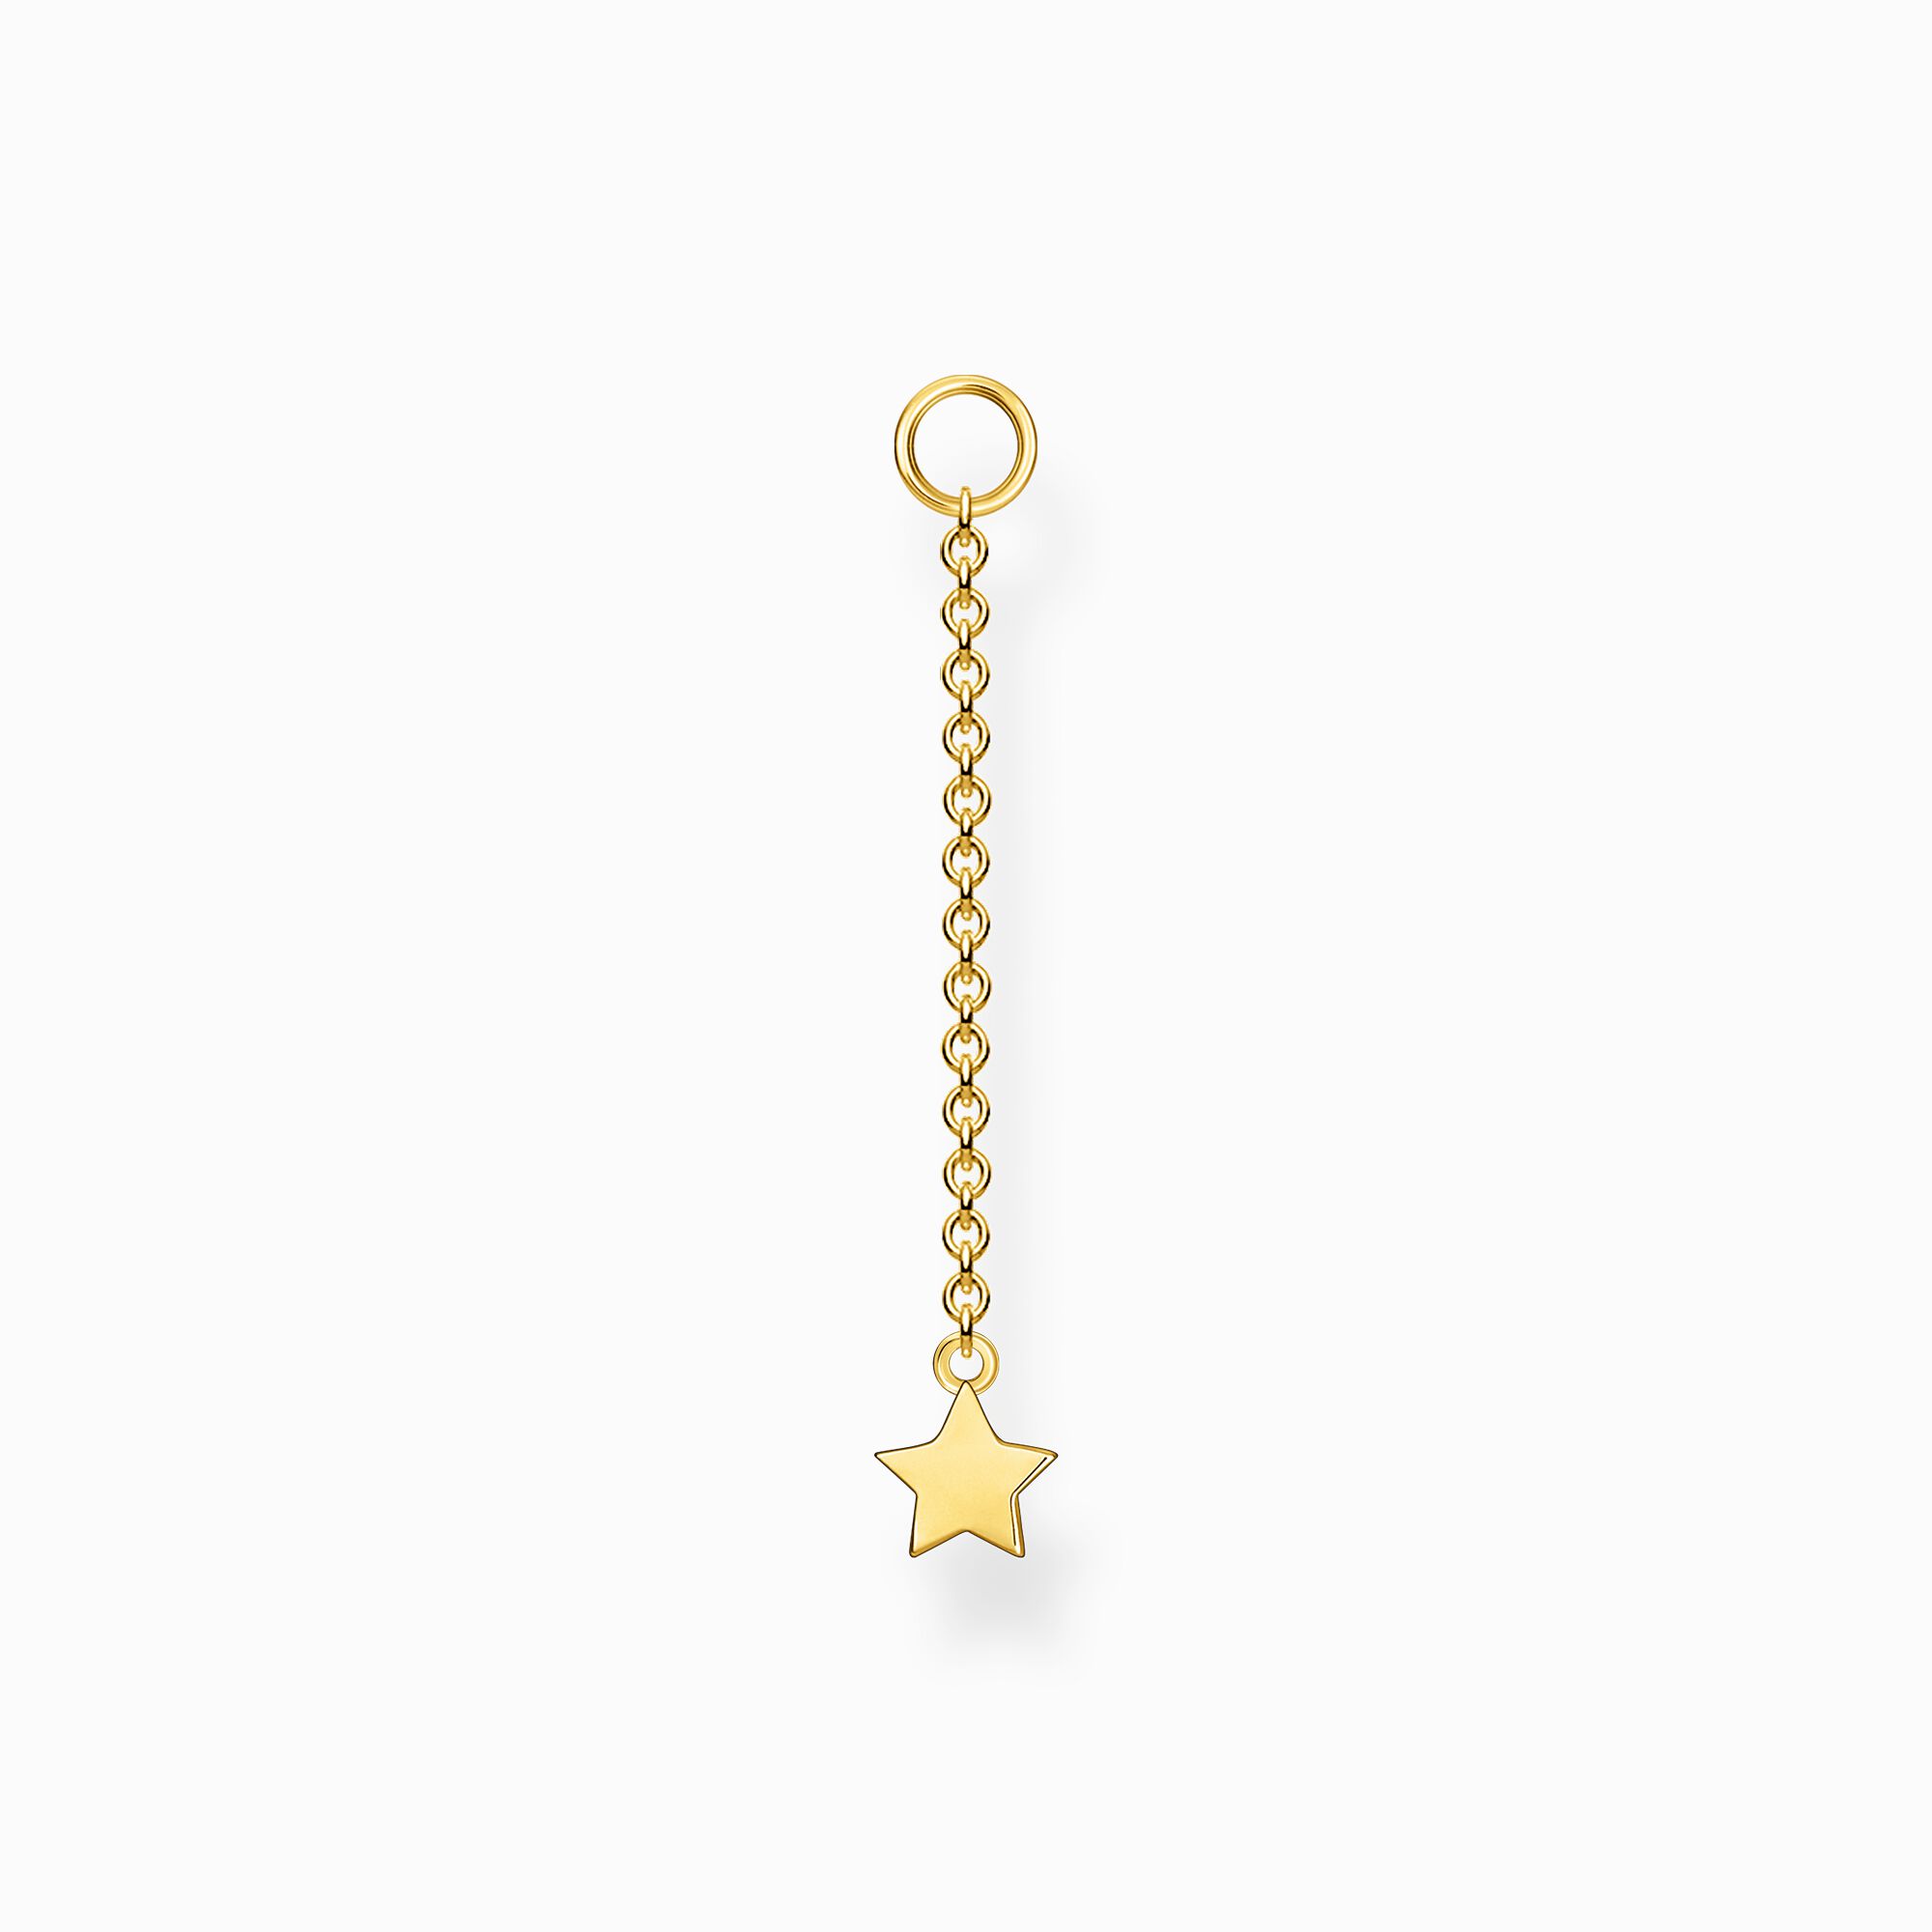 Golden earring pendant with chain – SABO THOMAS